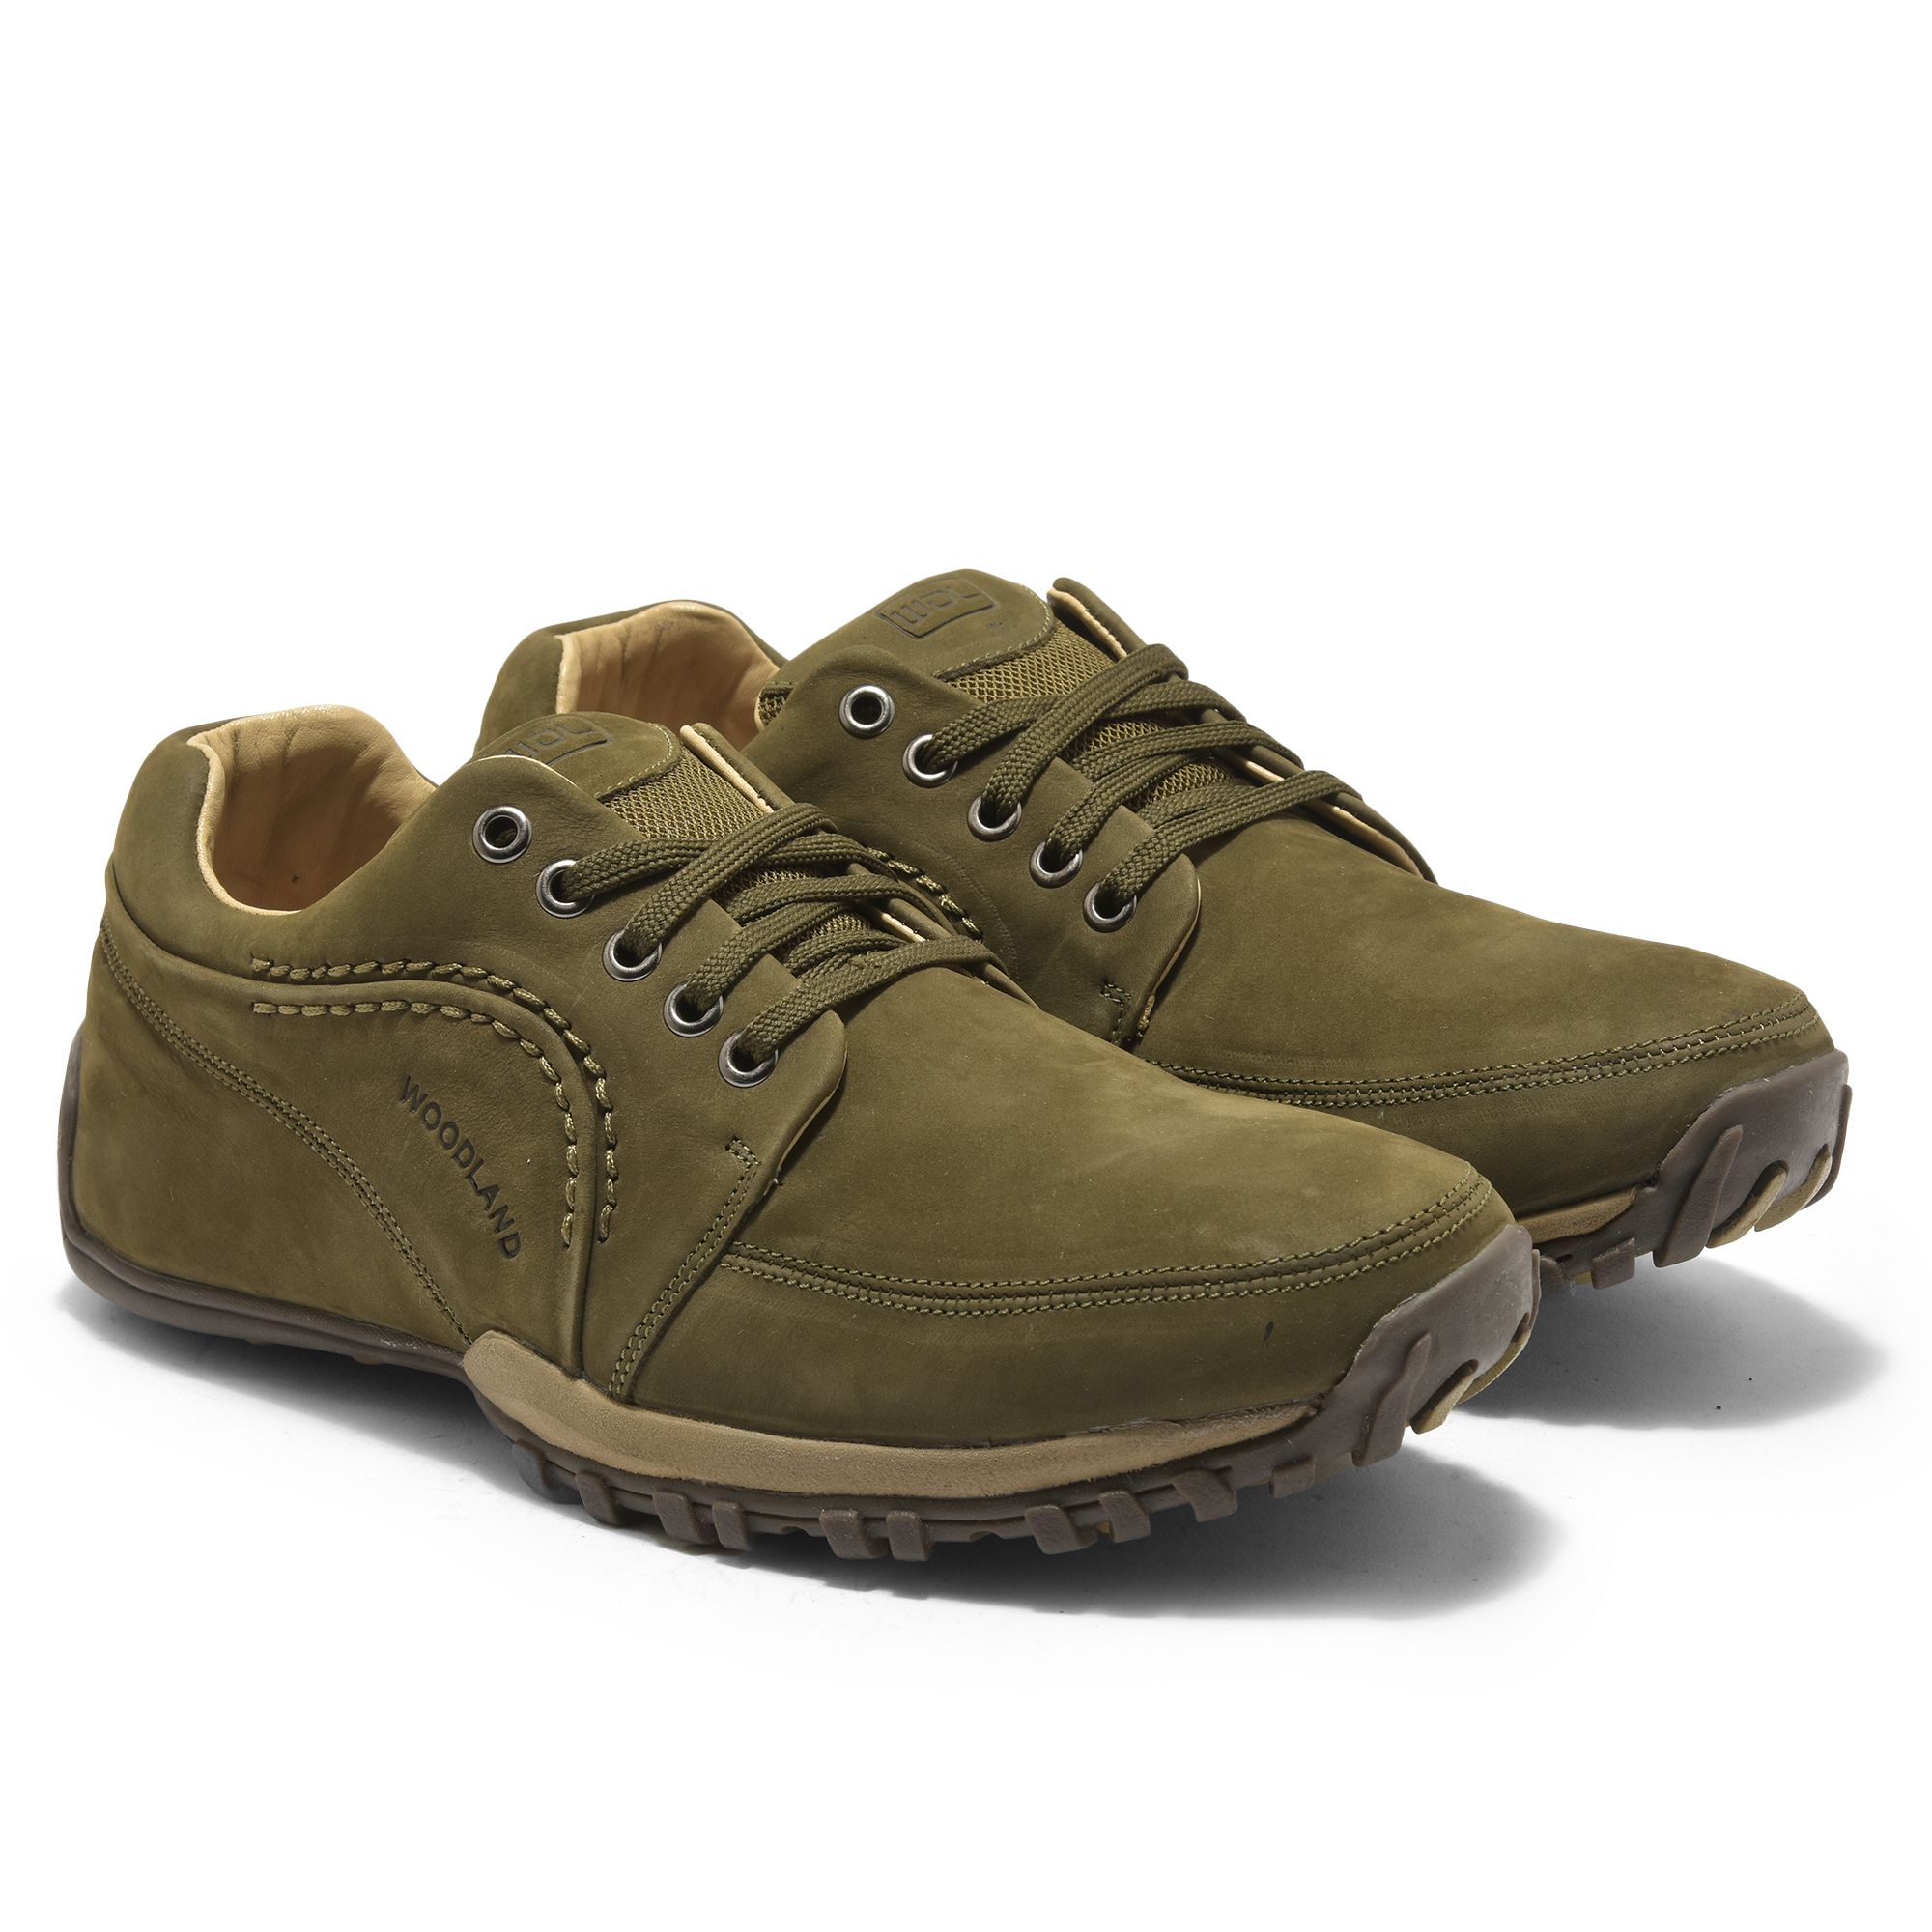 Buy Woodland Men's Olive Green Sneakers-7 UK/India (41 EU) -(GB 2089116) at  Amazon.in